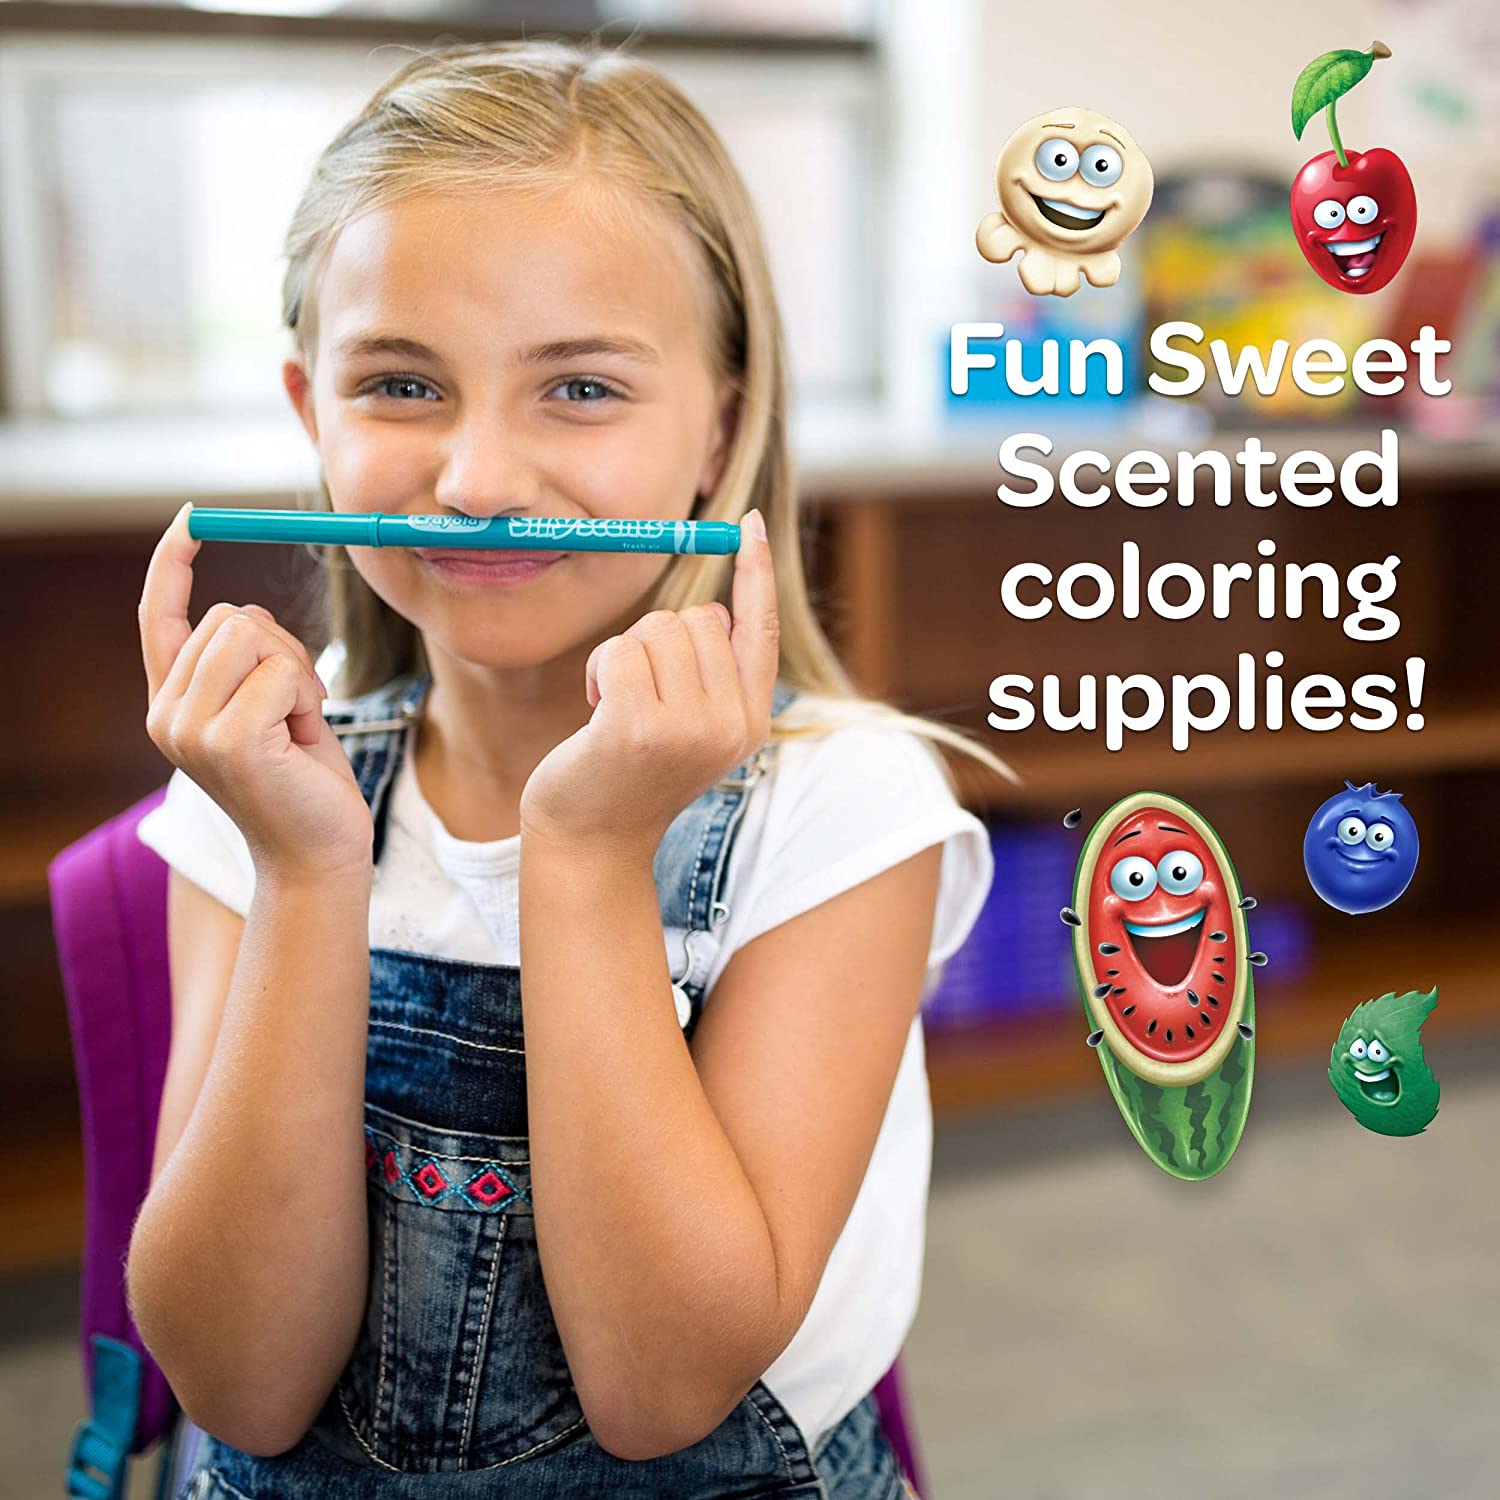 https://bigbigmart.com/wp-content/uploads/2023/02/Crayola-Silly-Scents-Mini-Inspiration-Art-Case-Coloring-Set-Gift-for-Kids-Ages-3-4-5-66.jpg